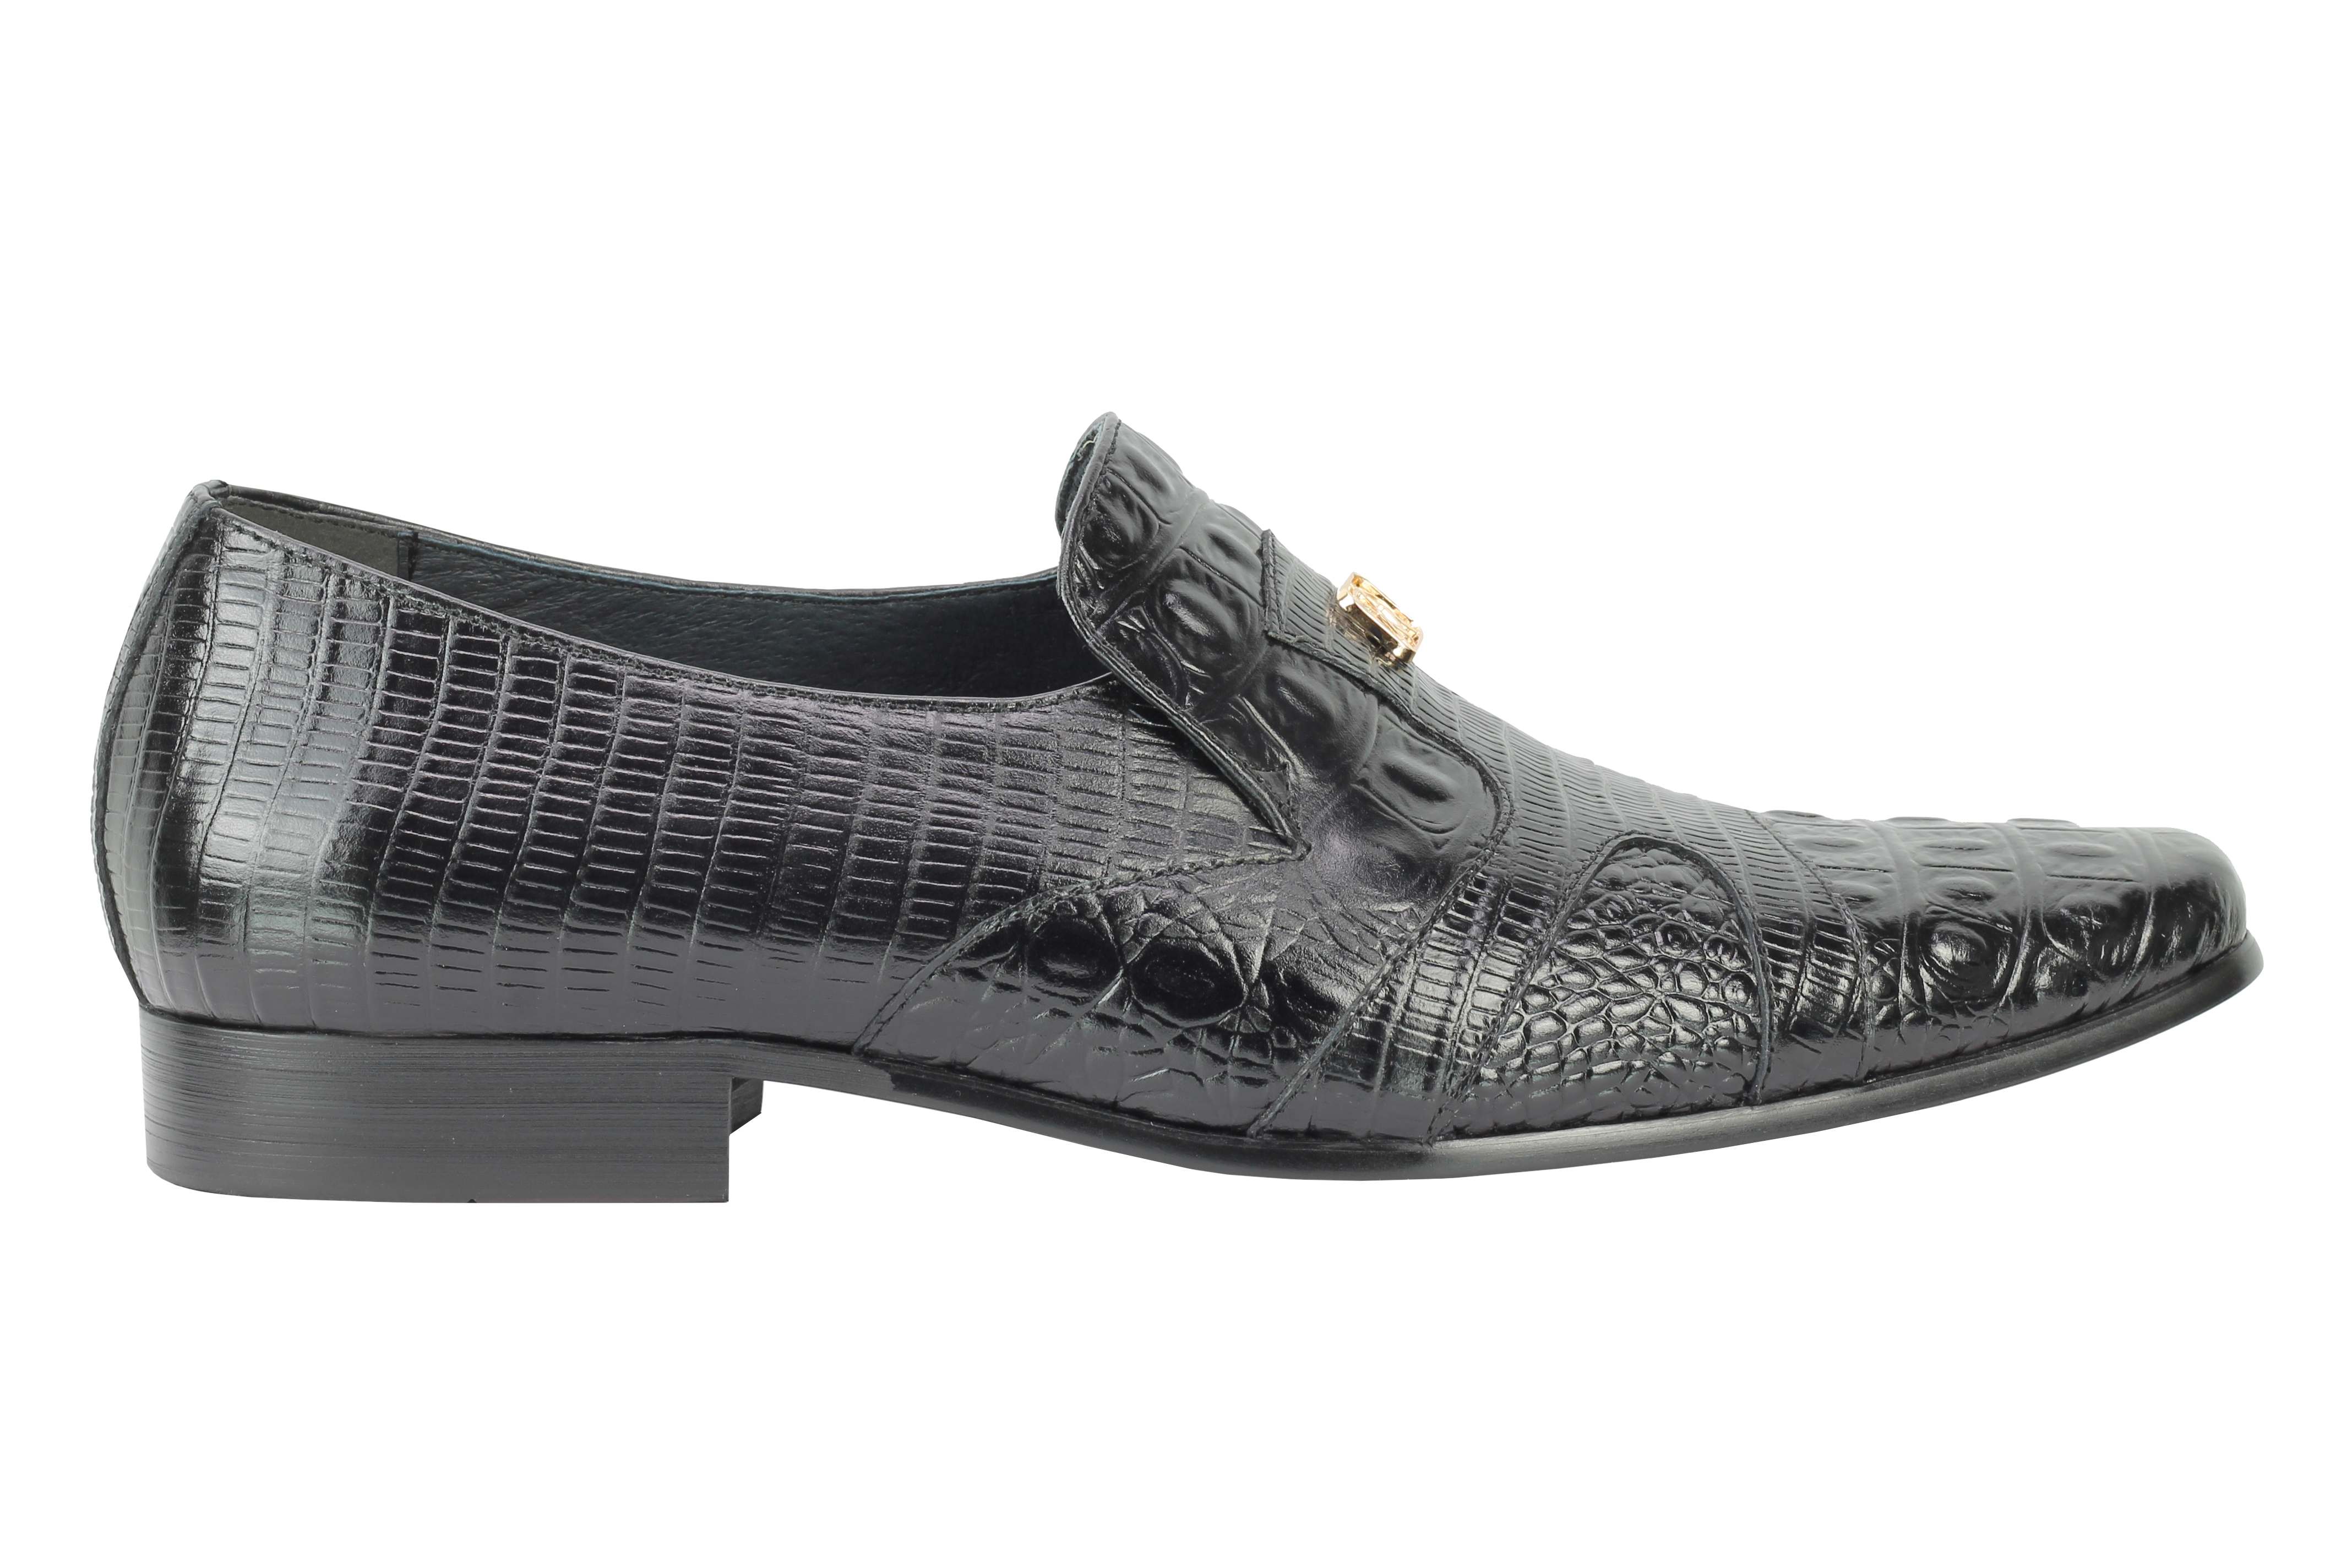 Real Leather Crocodile Print Party Loafers